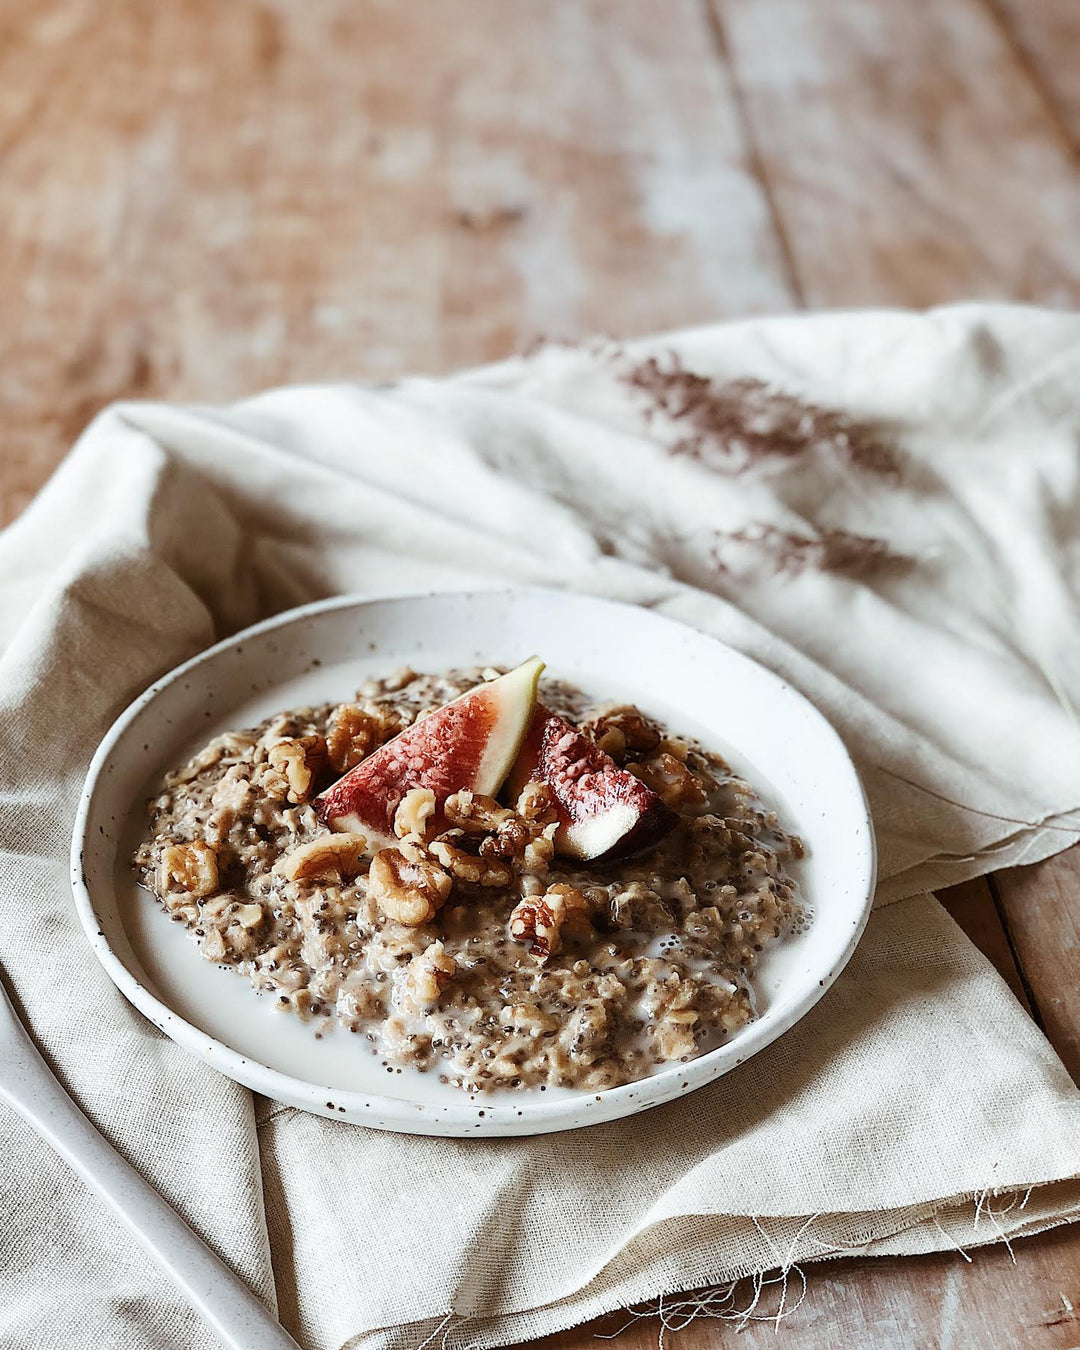 Bircher muesli with toasted walnuts, figs and chia seeds